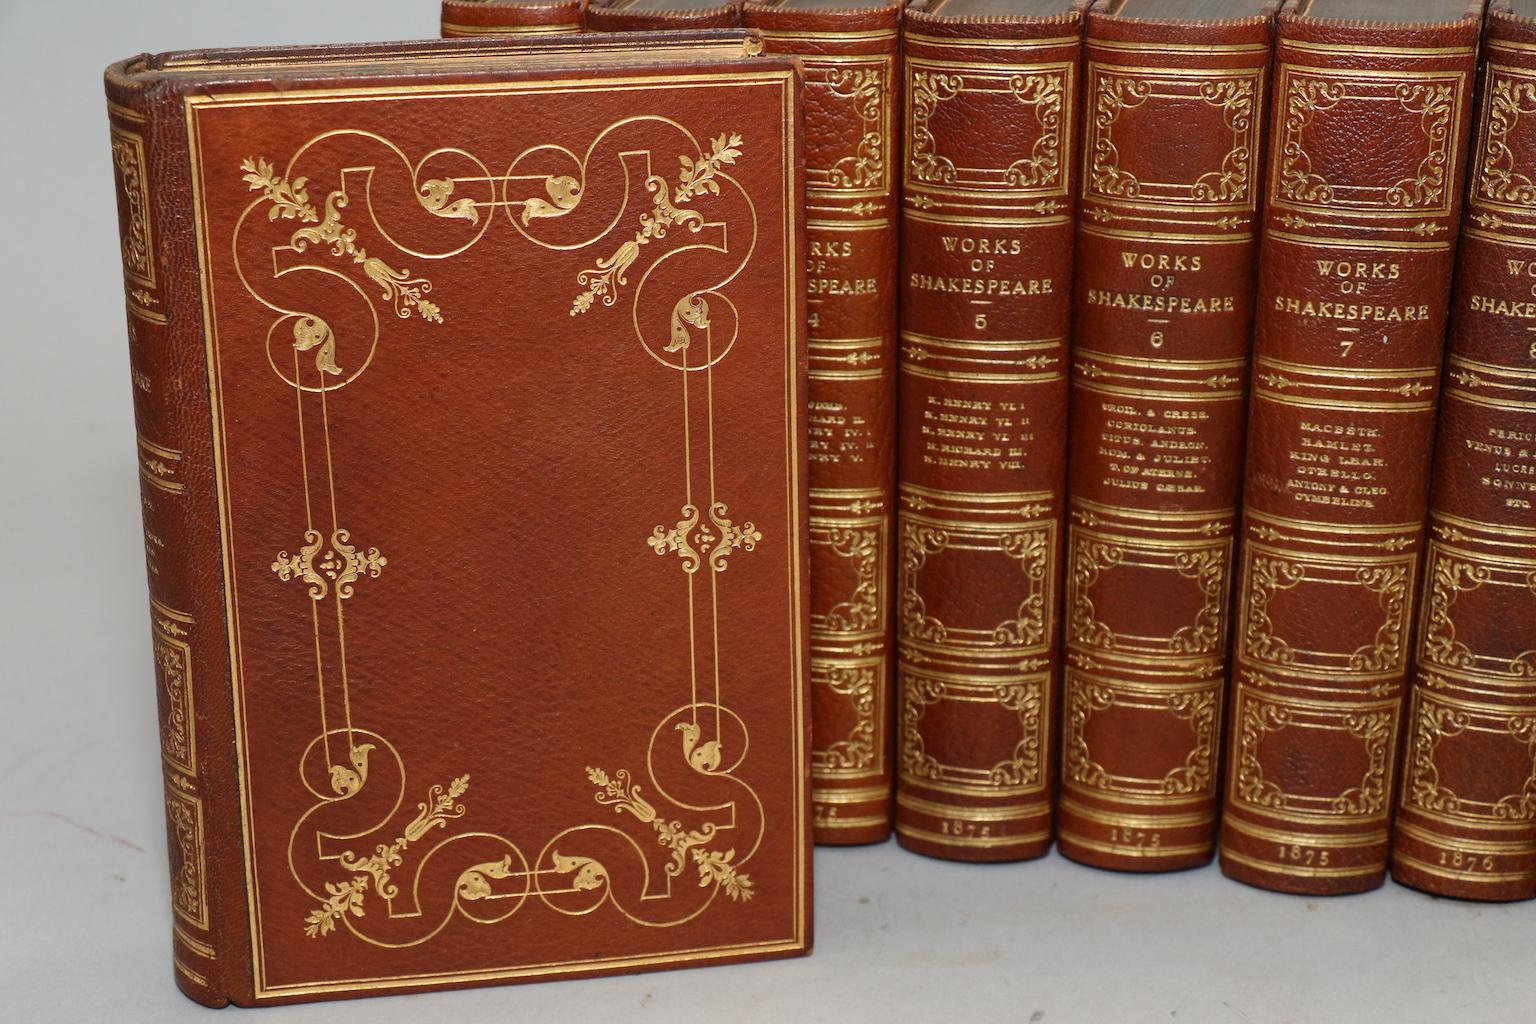 Dyed Books, The Works of William Shakespeare, Text revised by the Rev. Alexander Dyce